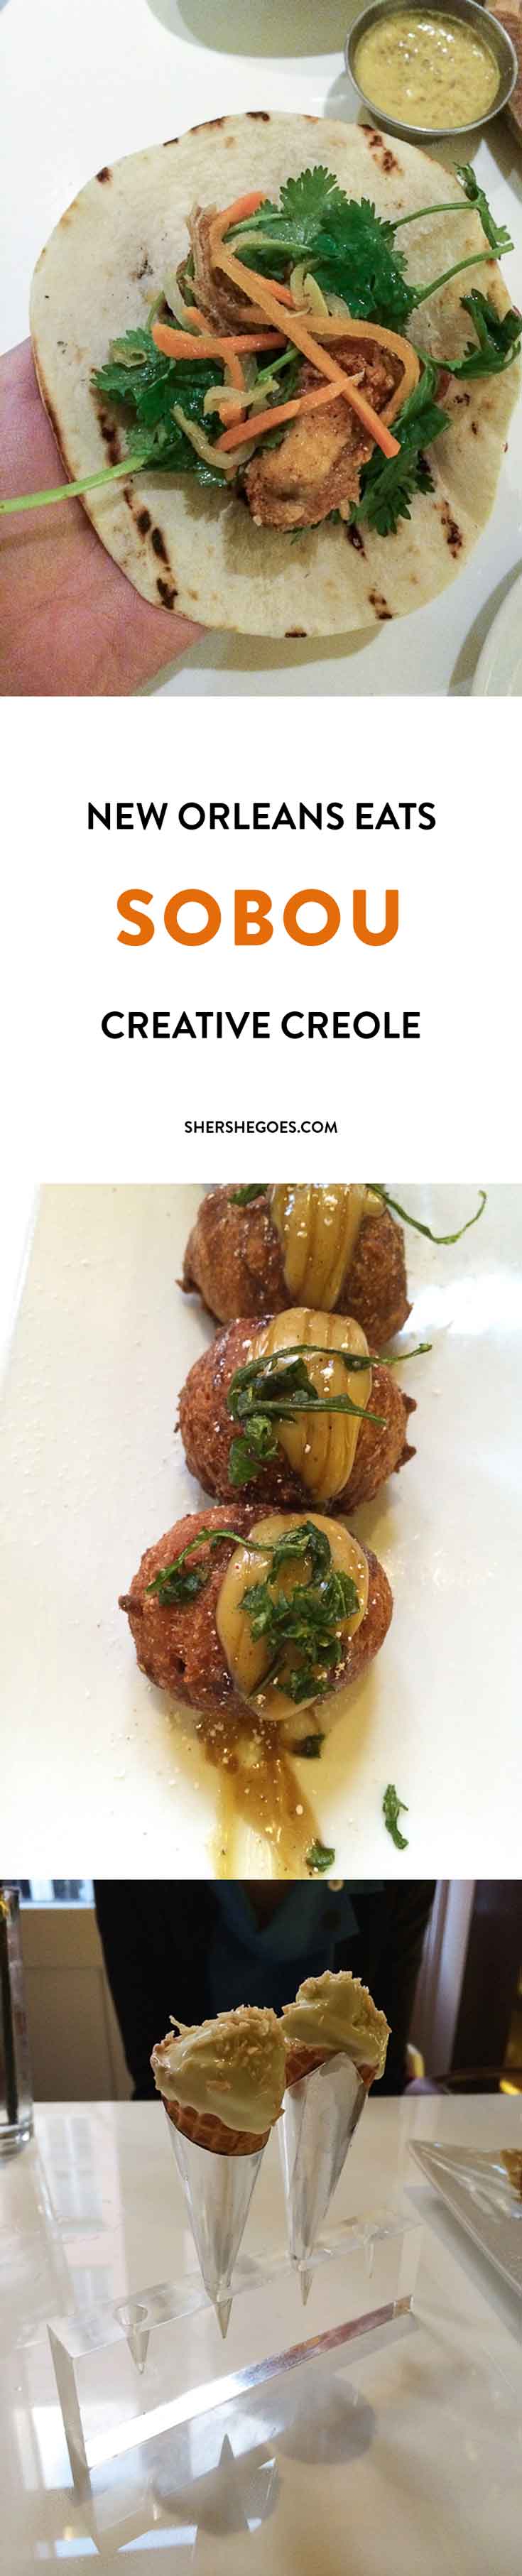 creative creoul cuisine in new orleans at restaurant SoBou